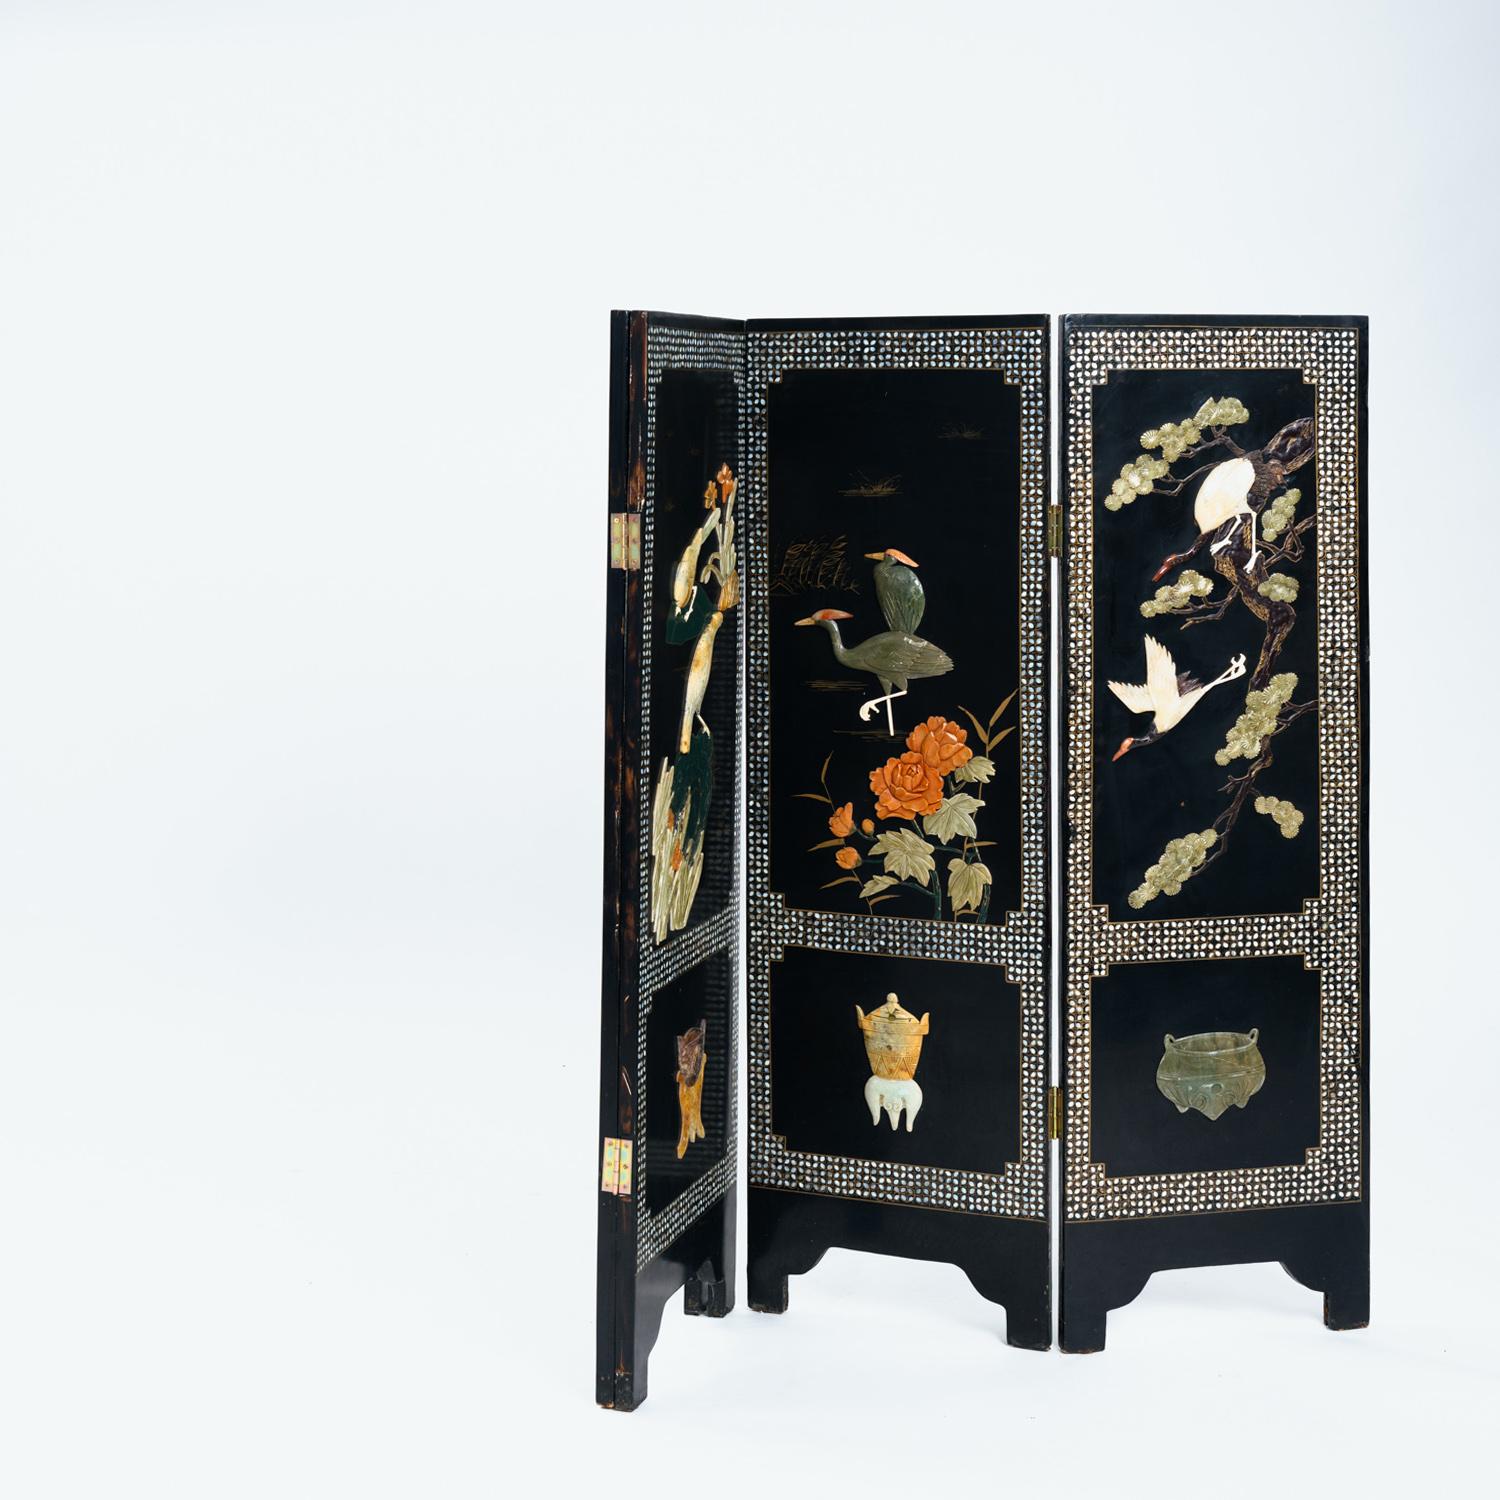 Chinese folding screen consisting of four fragments, fully decorated with botanical and bird motifs made of decorative stones and mother-of-pearl, the back florally decorated. 
Sculptural quality. Mid 20th century.
wide: 160 cm
height: 130 cm

the